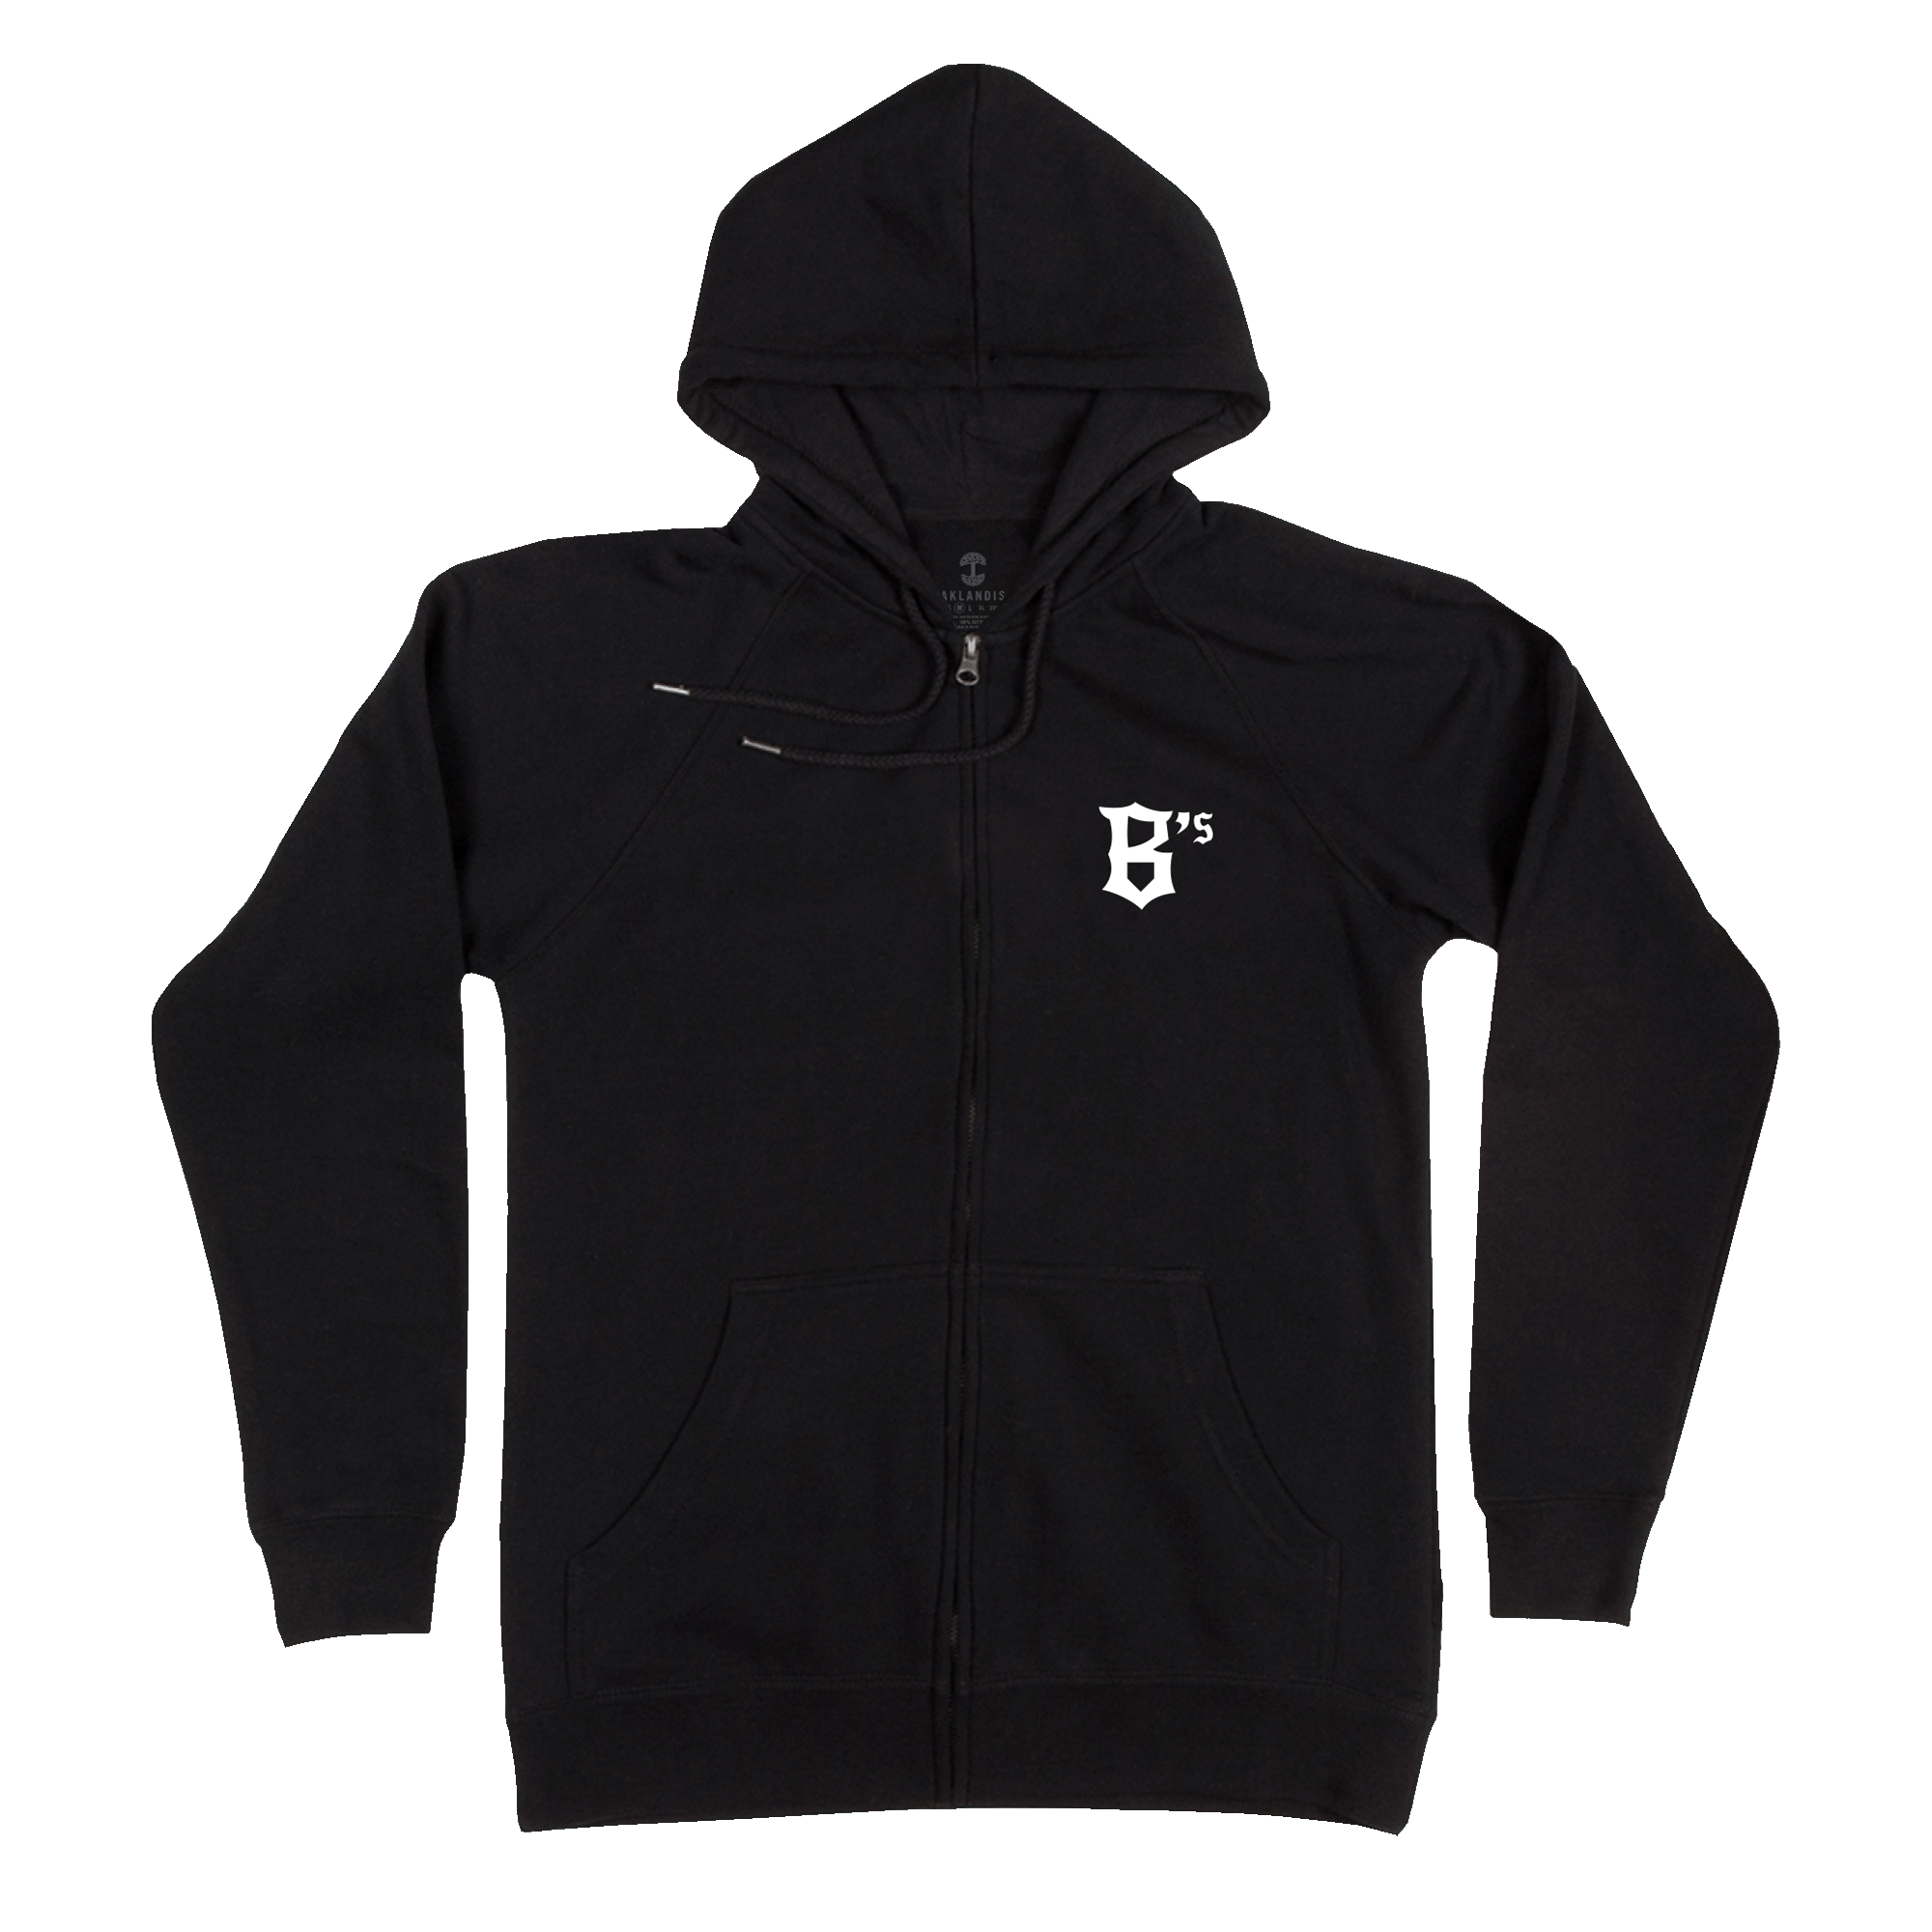 Front view of a black zip-up hooded sweatshirt with Oakland B’s logo on the front chest.